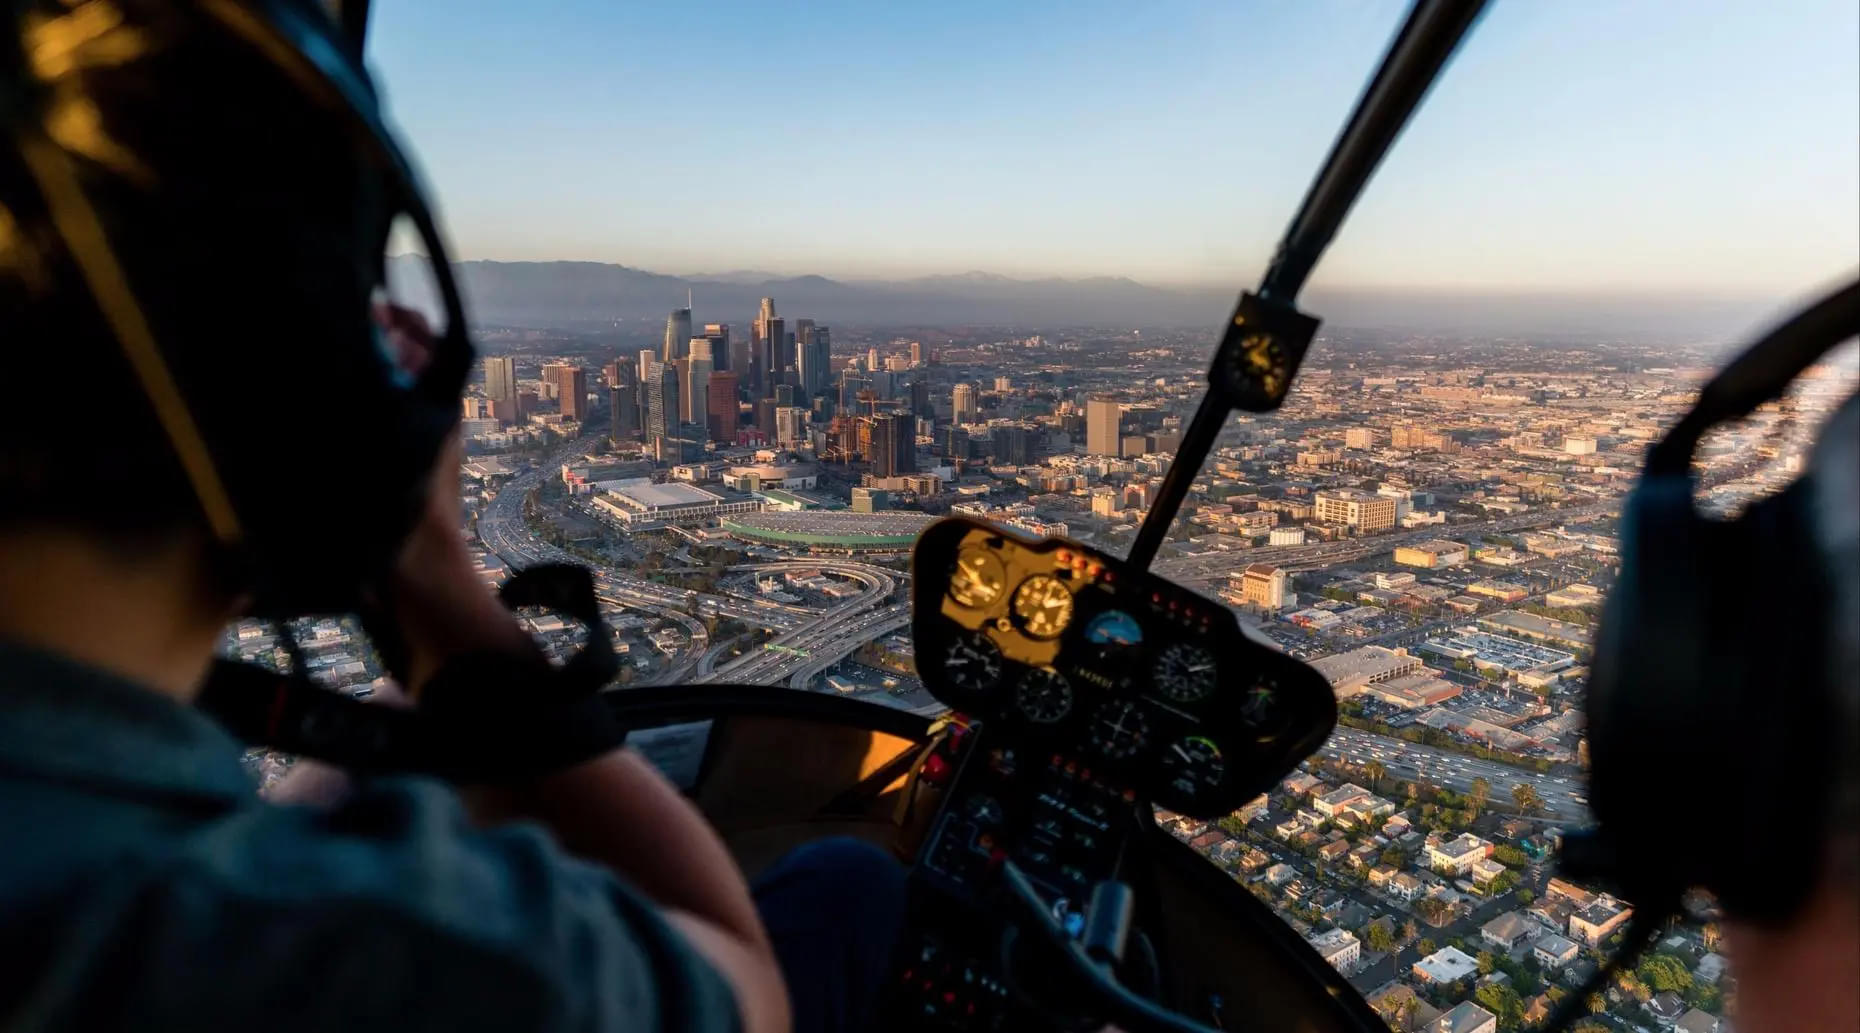 Hop on this 10-Minute Helicopter Tour